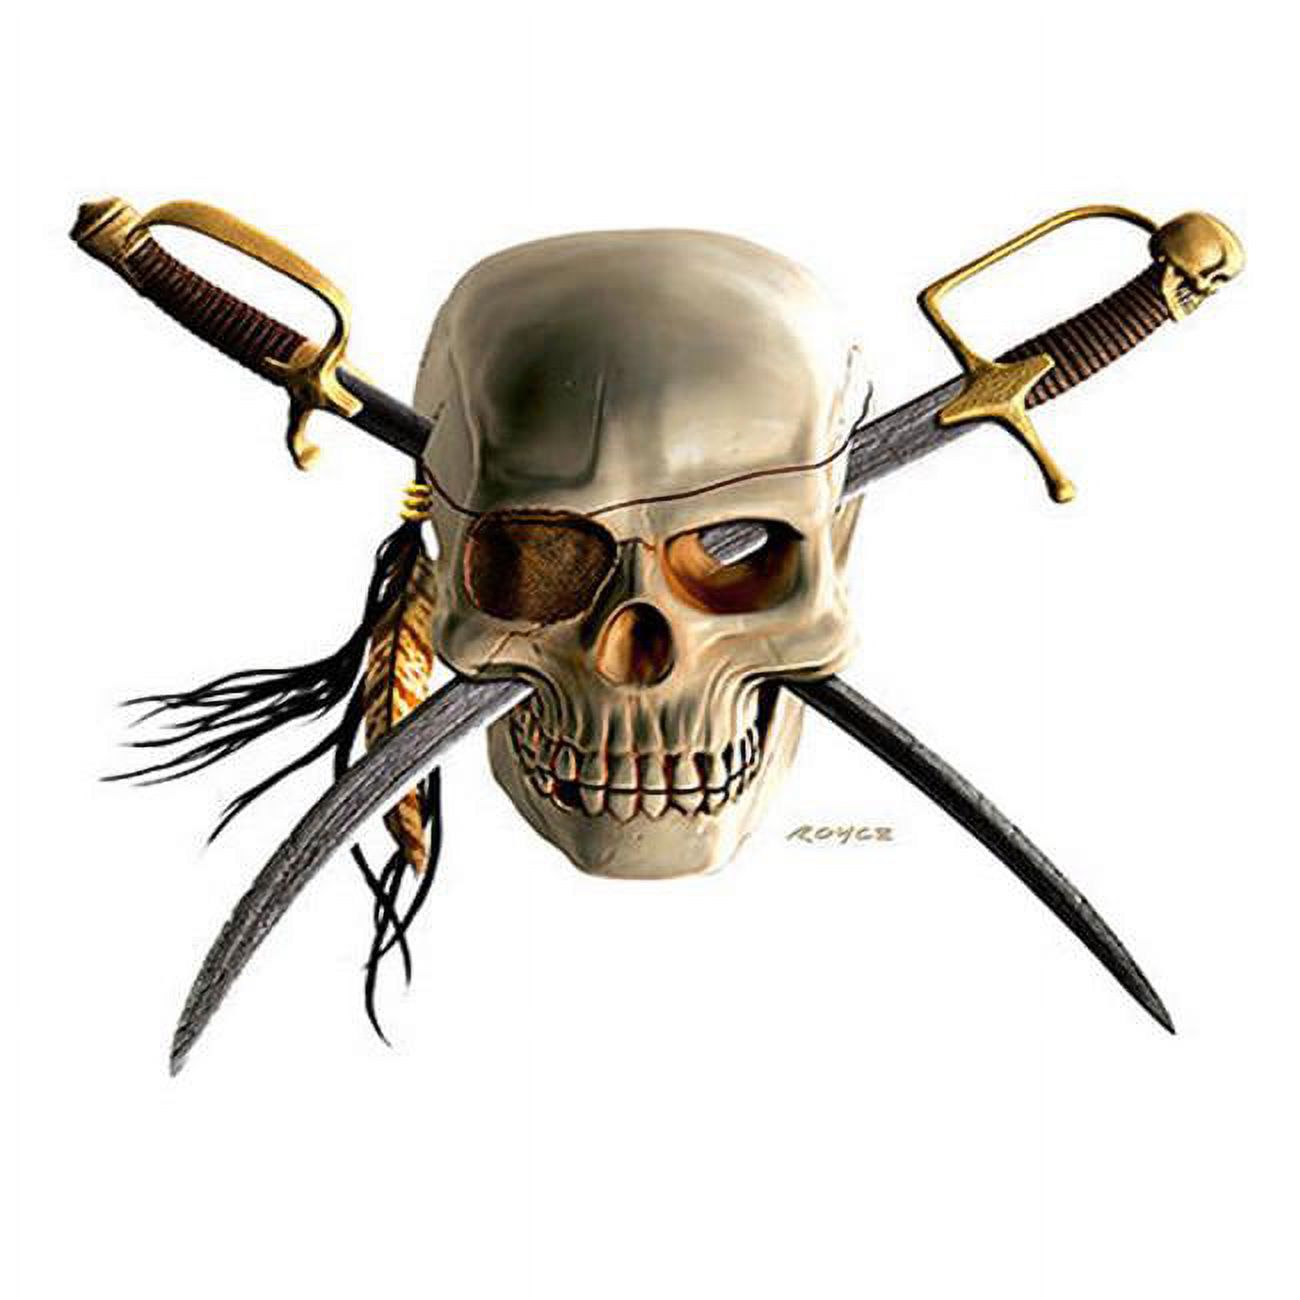 SignMission P-1717 Pirate Skull Pirate Skull Novelty Sign - image 1 of 1